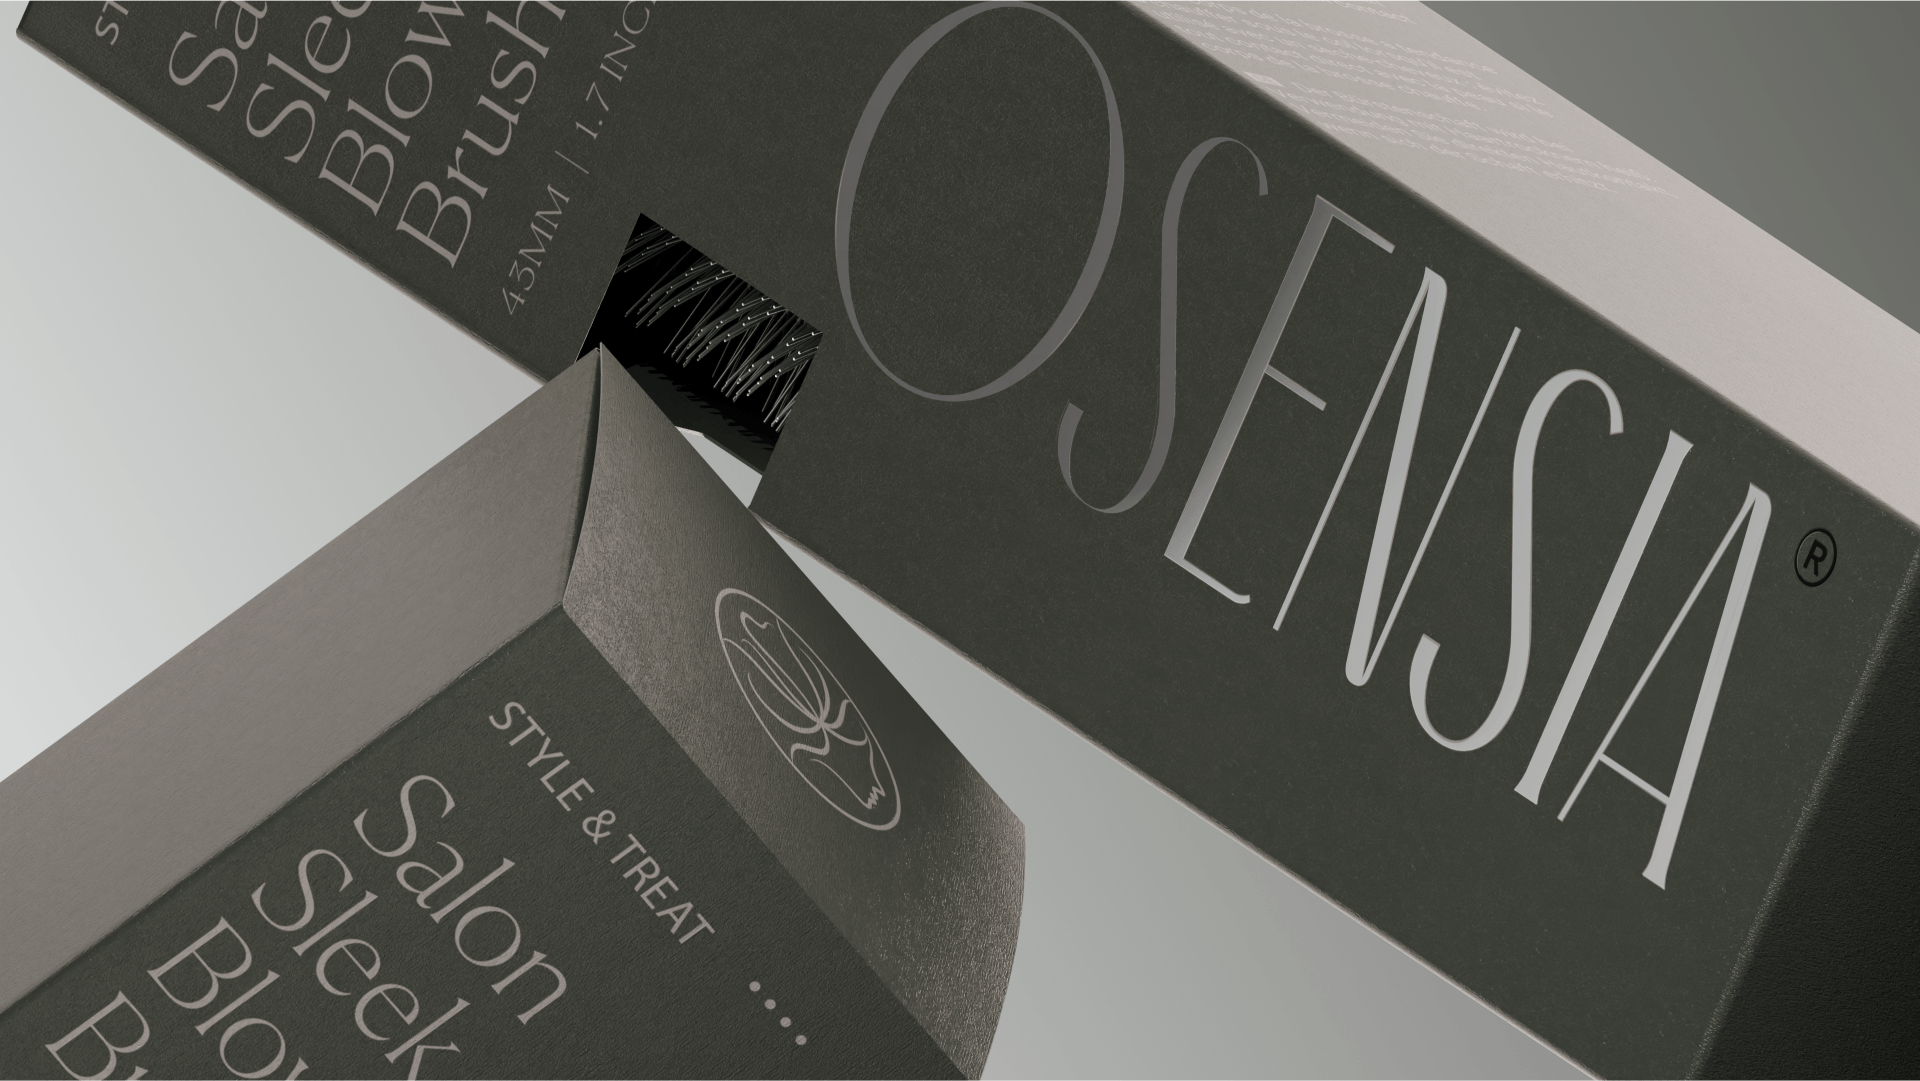 Osensia Hair Care Delivers Elegant Typography and Earthy Tones